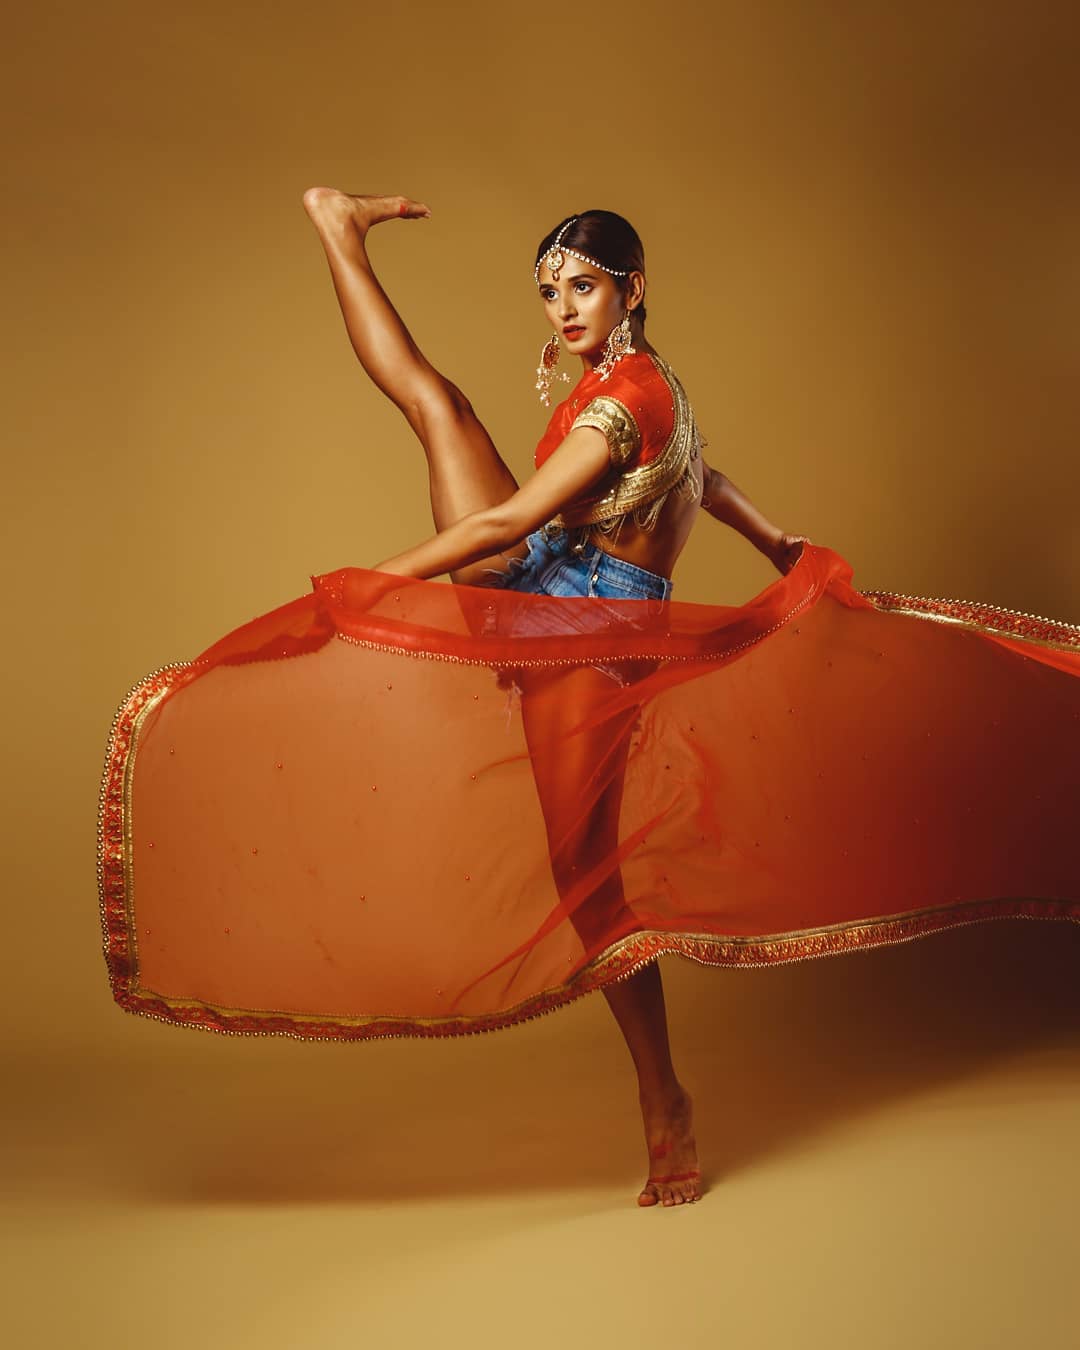 Shakti Mohan looks stunning in THIS latest photo - The Indian Wire.